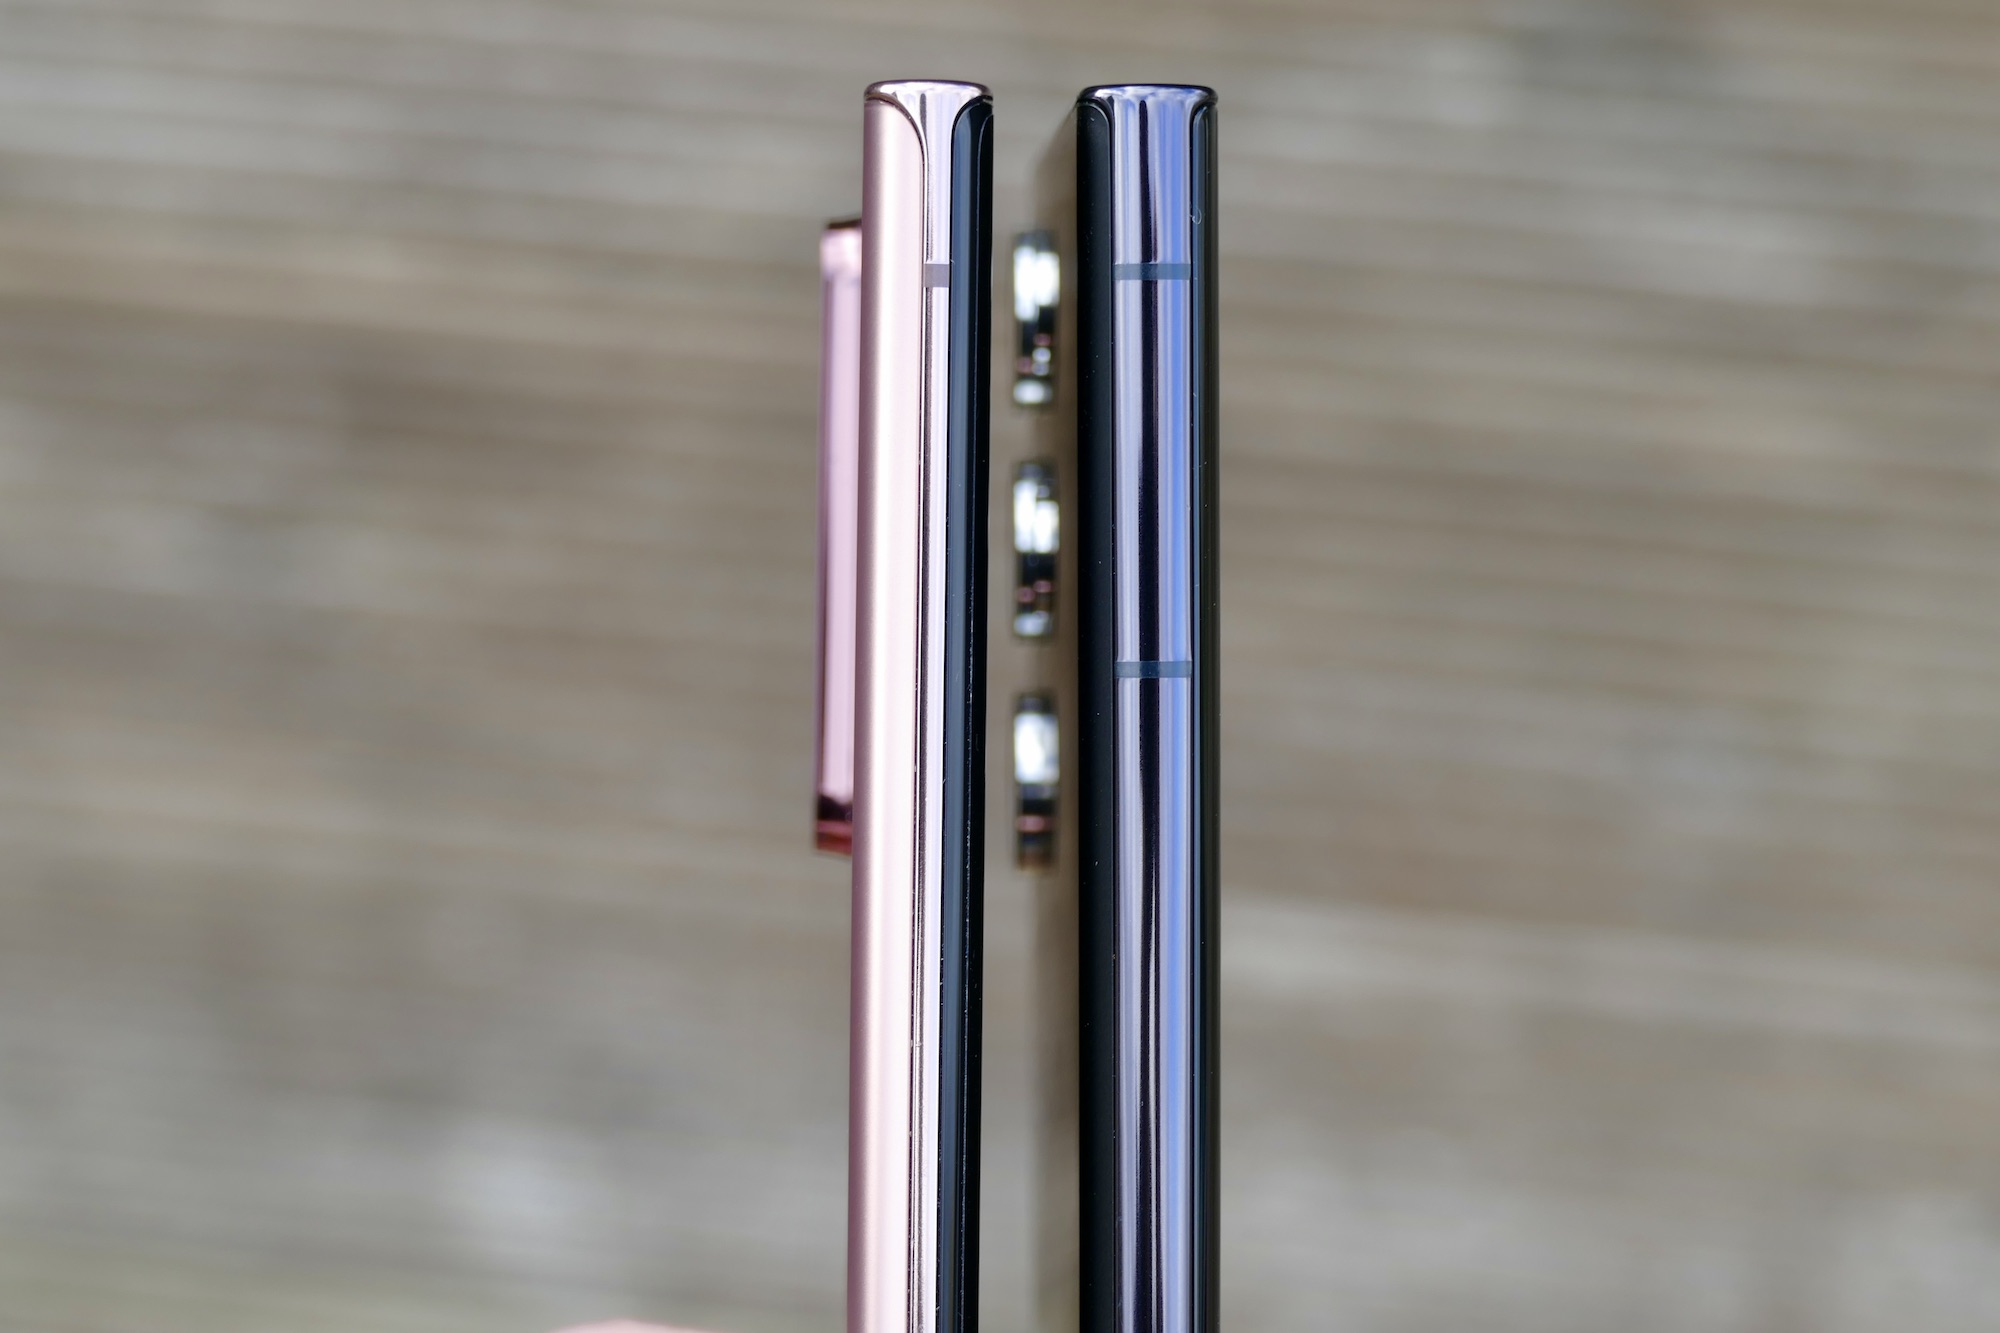 Galaxy S22 Ultra and Note 20 Ultra seen from the side.